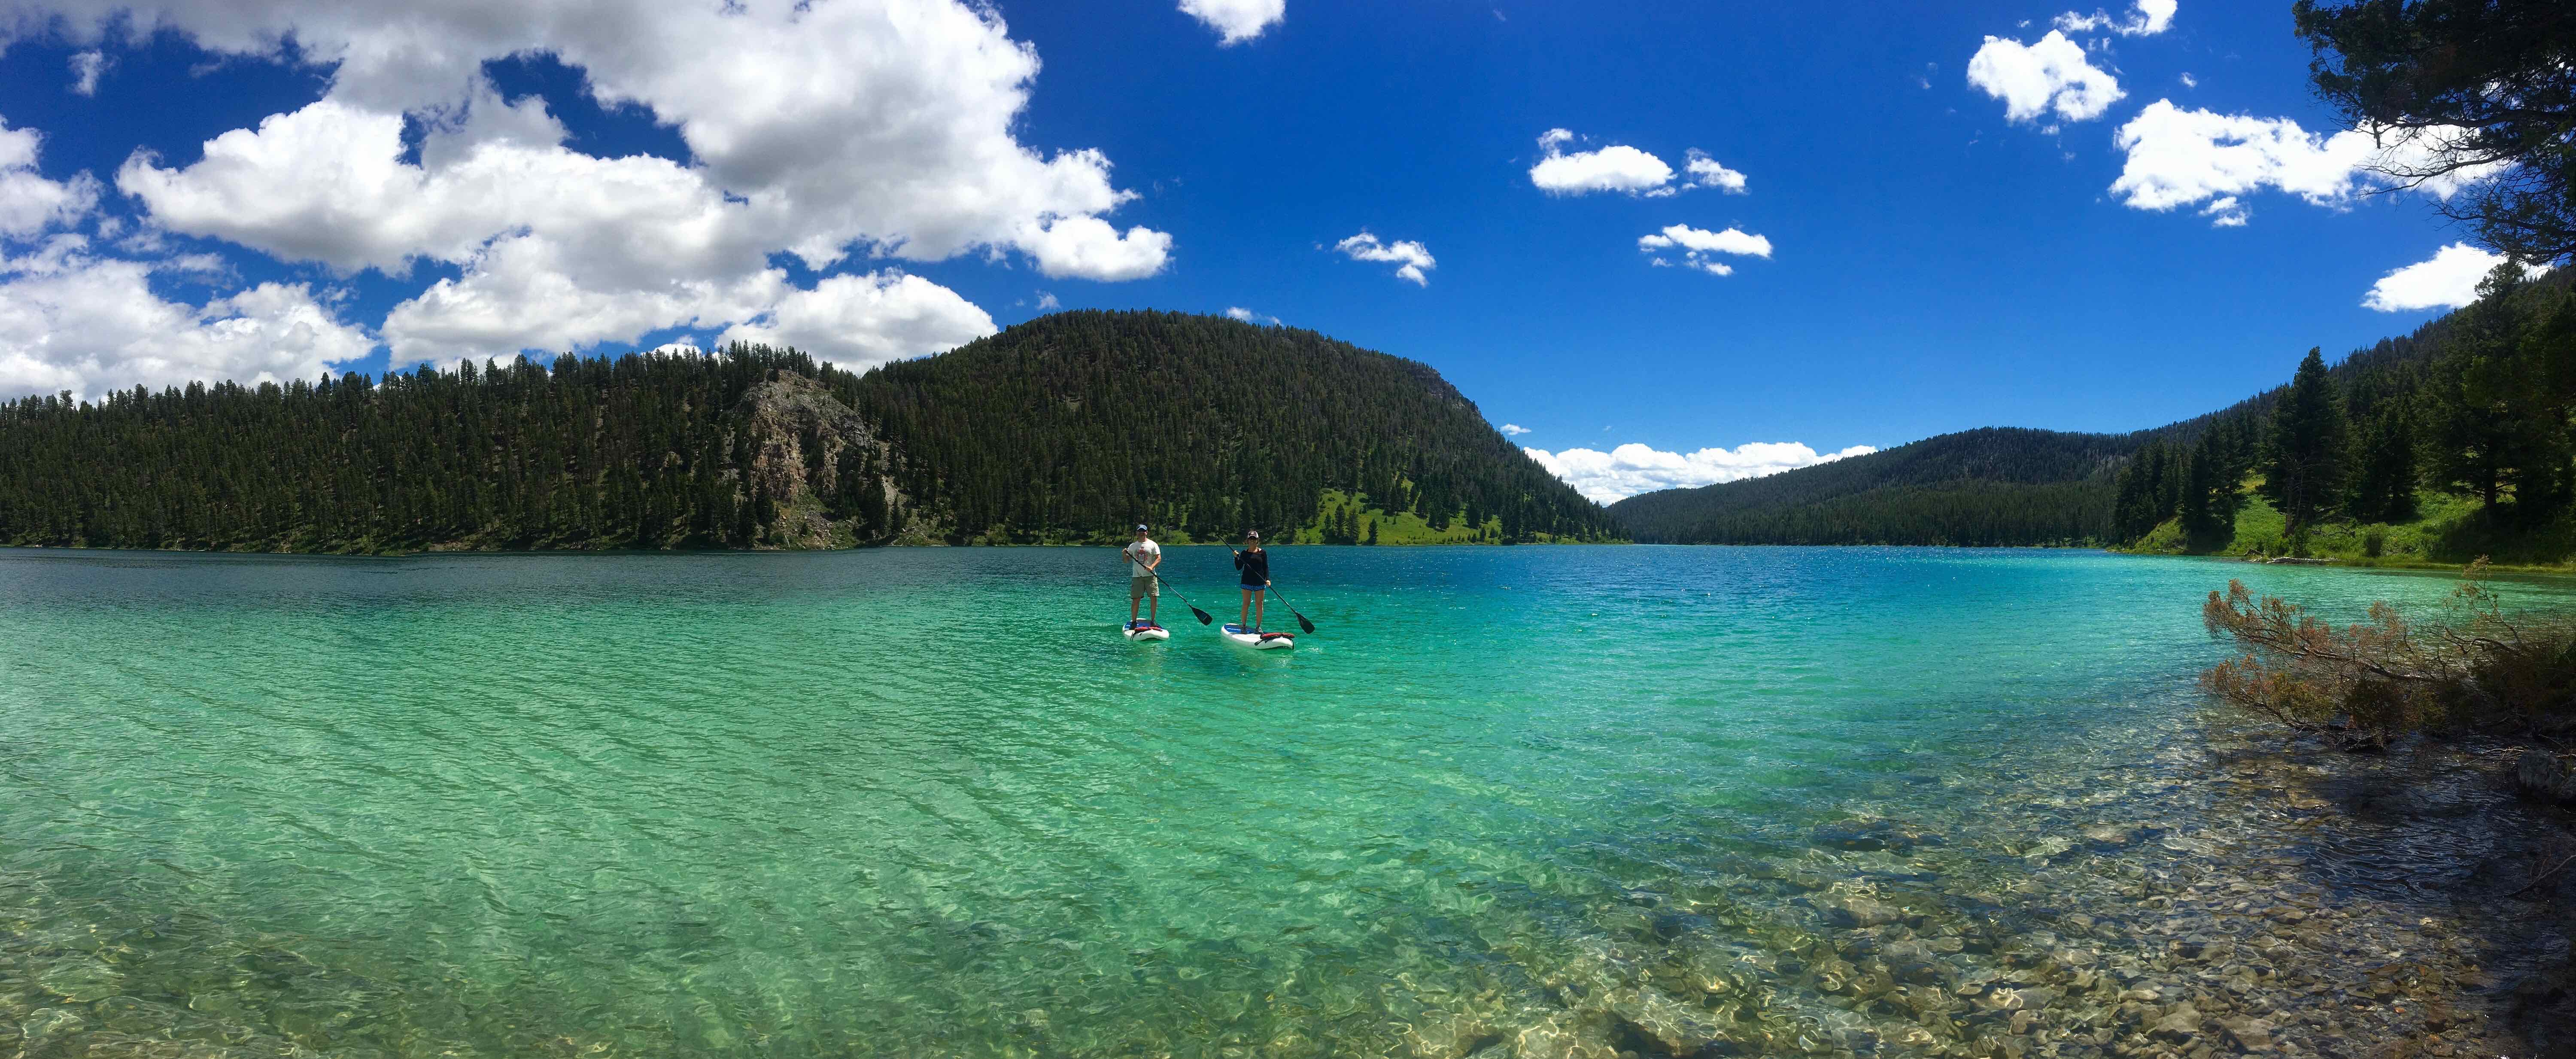 Paddle Boarding in Big Sky Country